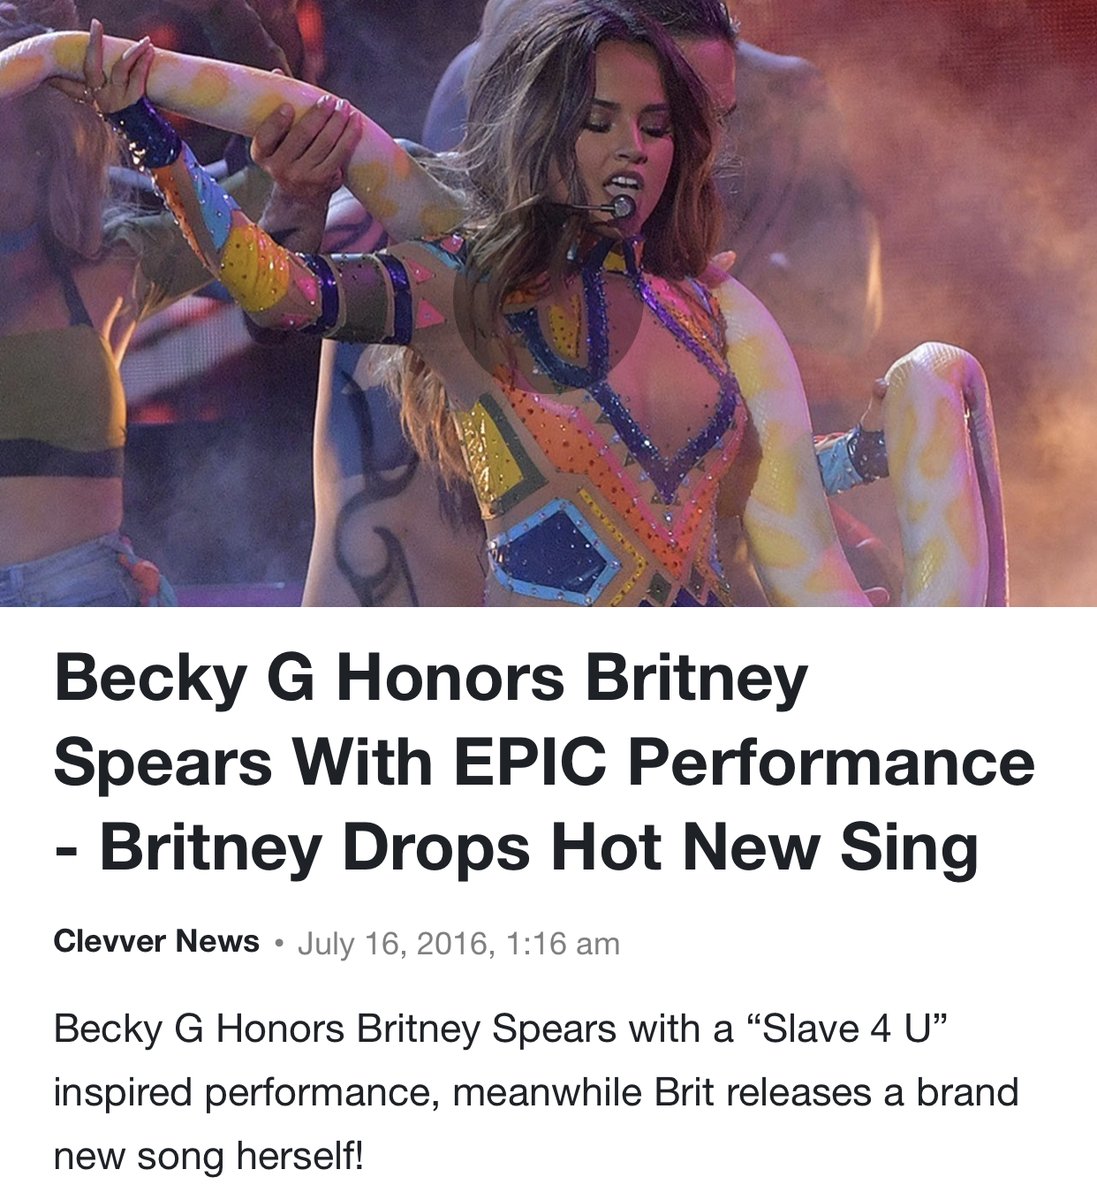 Becky G paid tribute to Britney's iconic "I'm a Slave 4 U" performance.